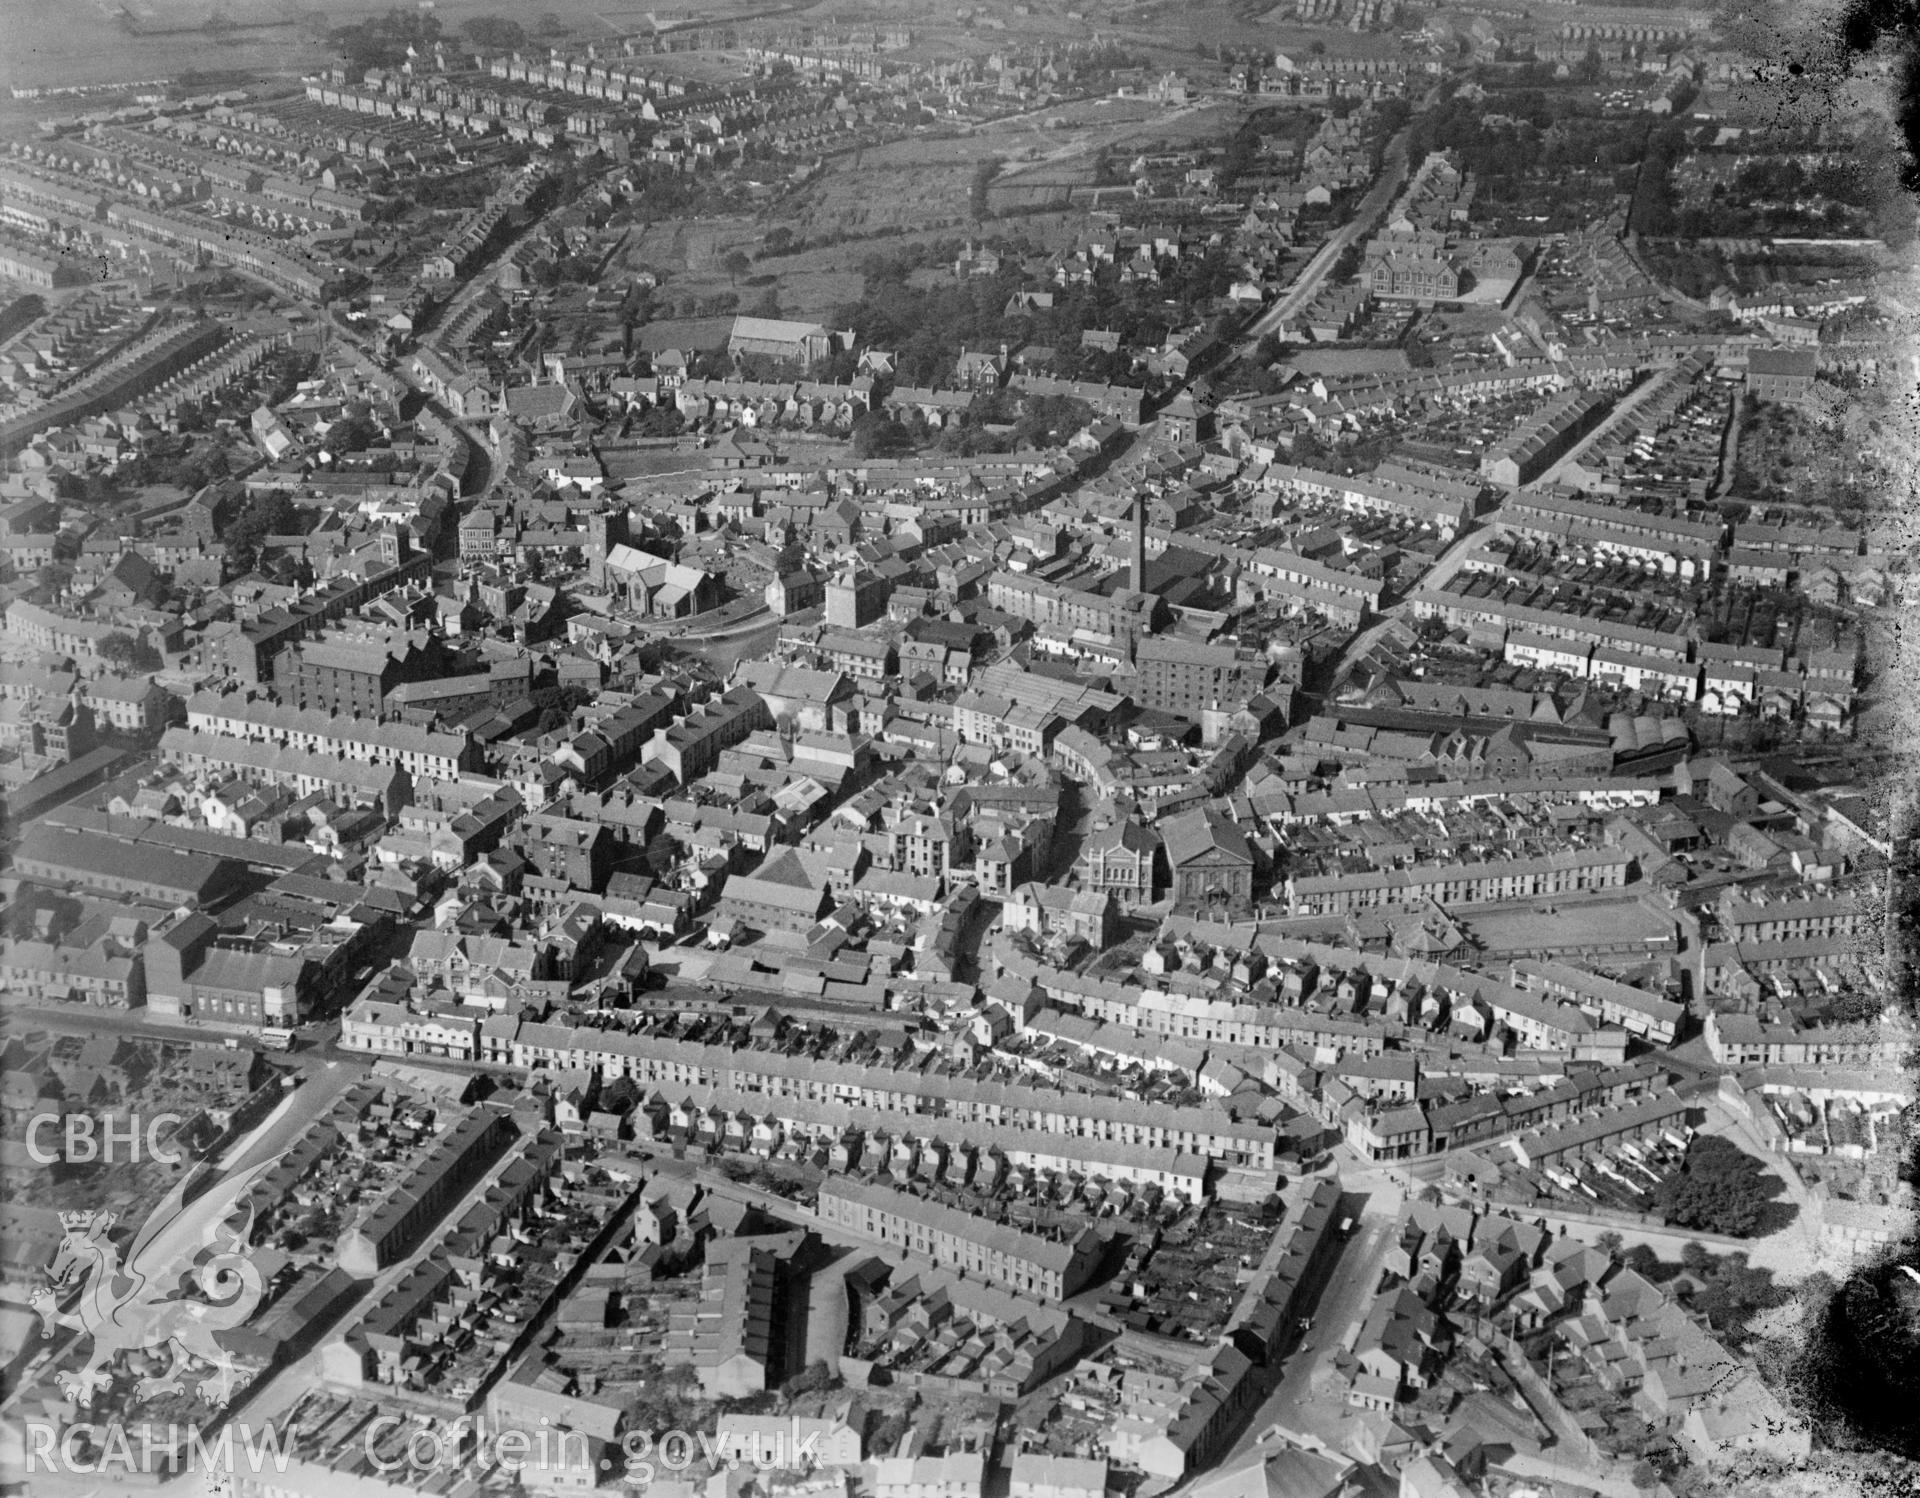 General view of Llanelli, oblique aerial view. 5?x4? black and white glass plate negative.